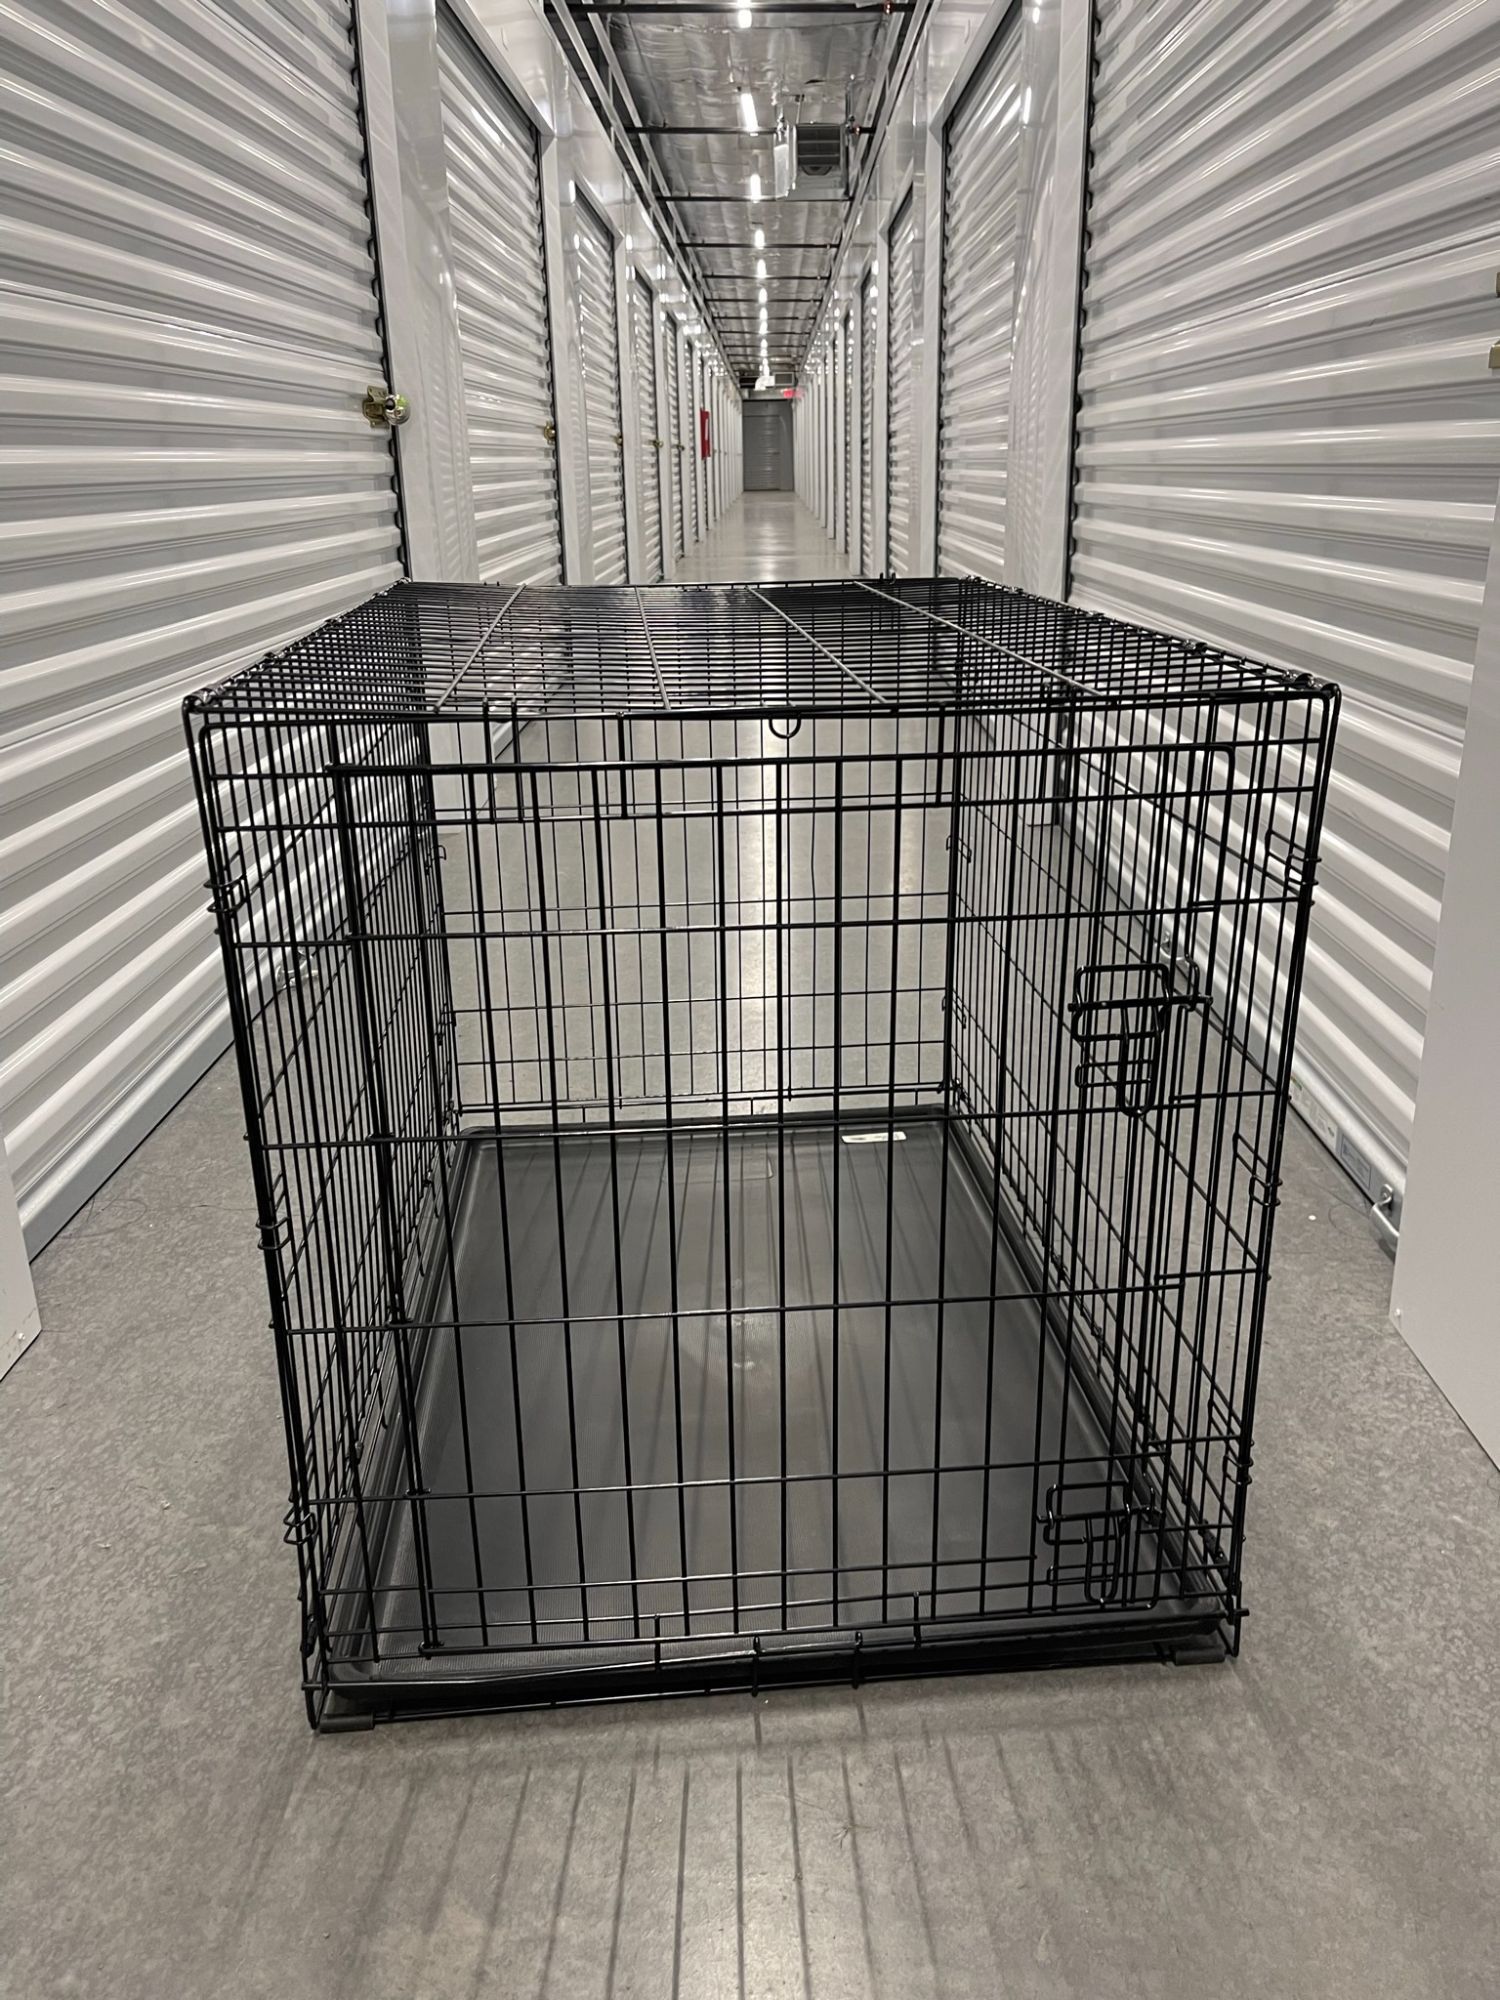 New World 42" Large Dog Kennel Crate Wire 42X28X30 Divider Pull Out Leak Proof Tray